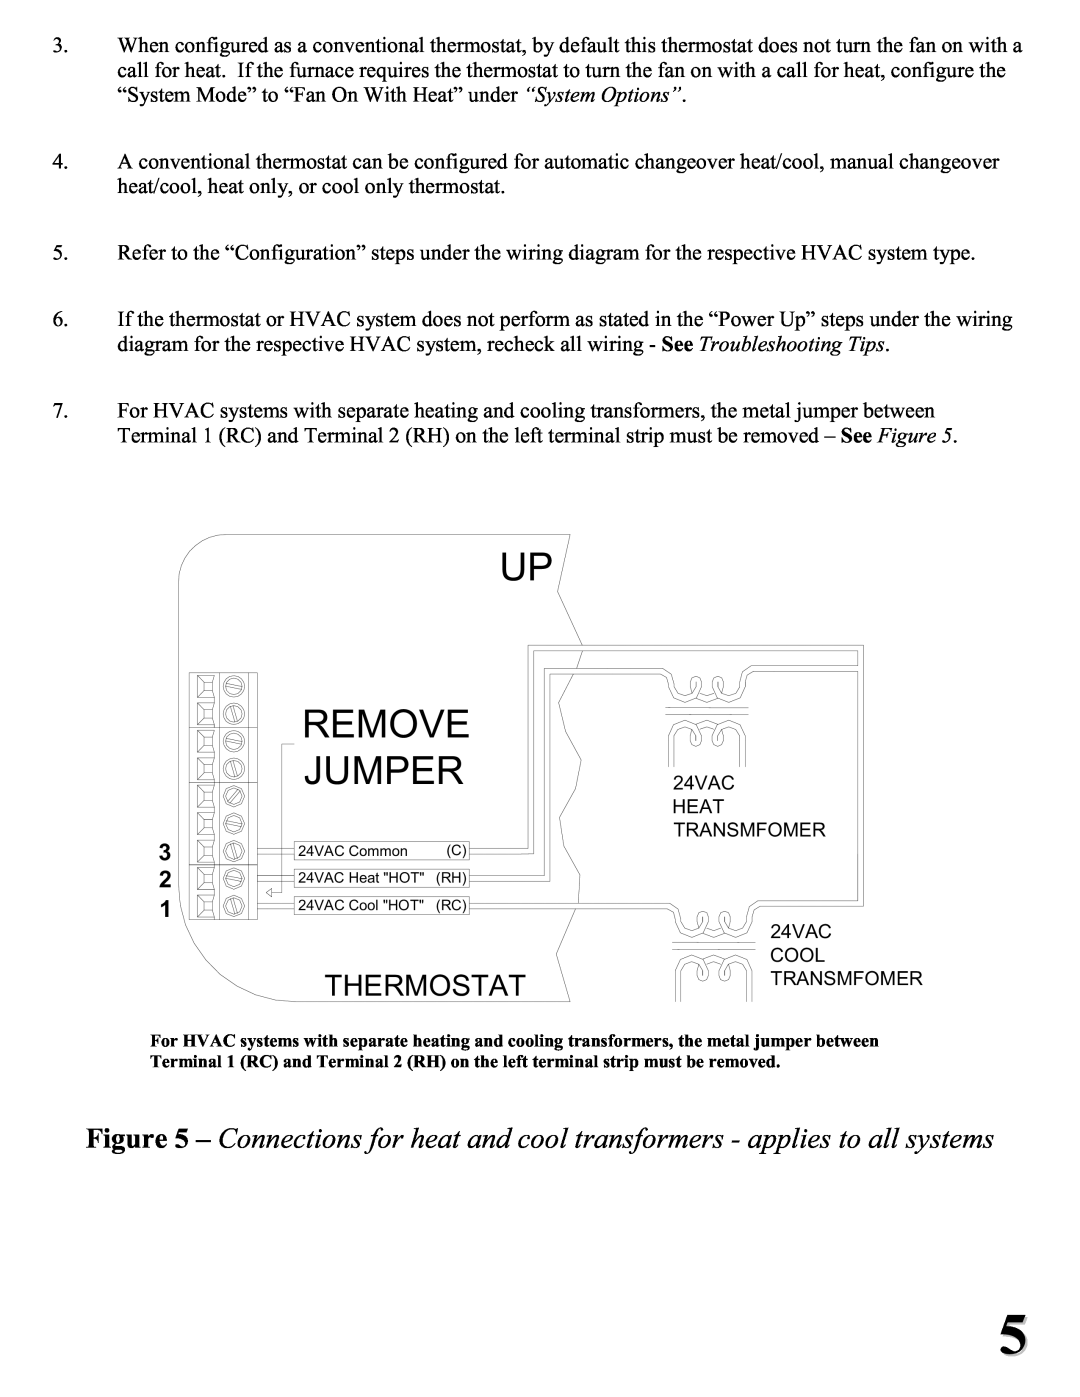 Home Automation RC-1000 installation instructions Remove, Jumper, Thermostat, 24VAC, Heat, Transmfomer, Cool 